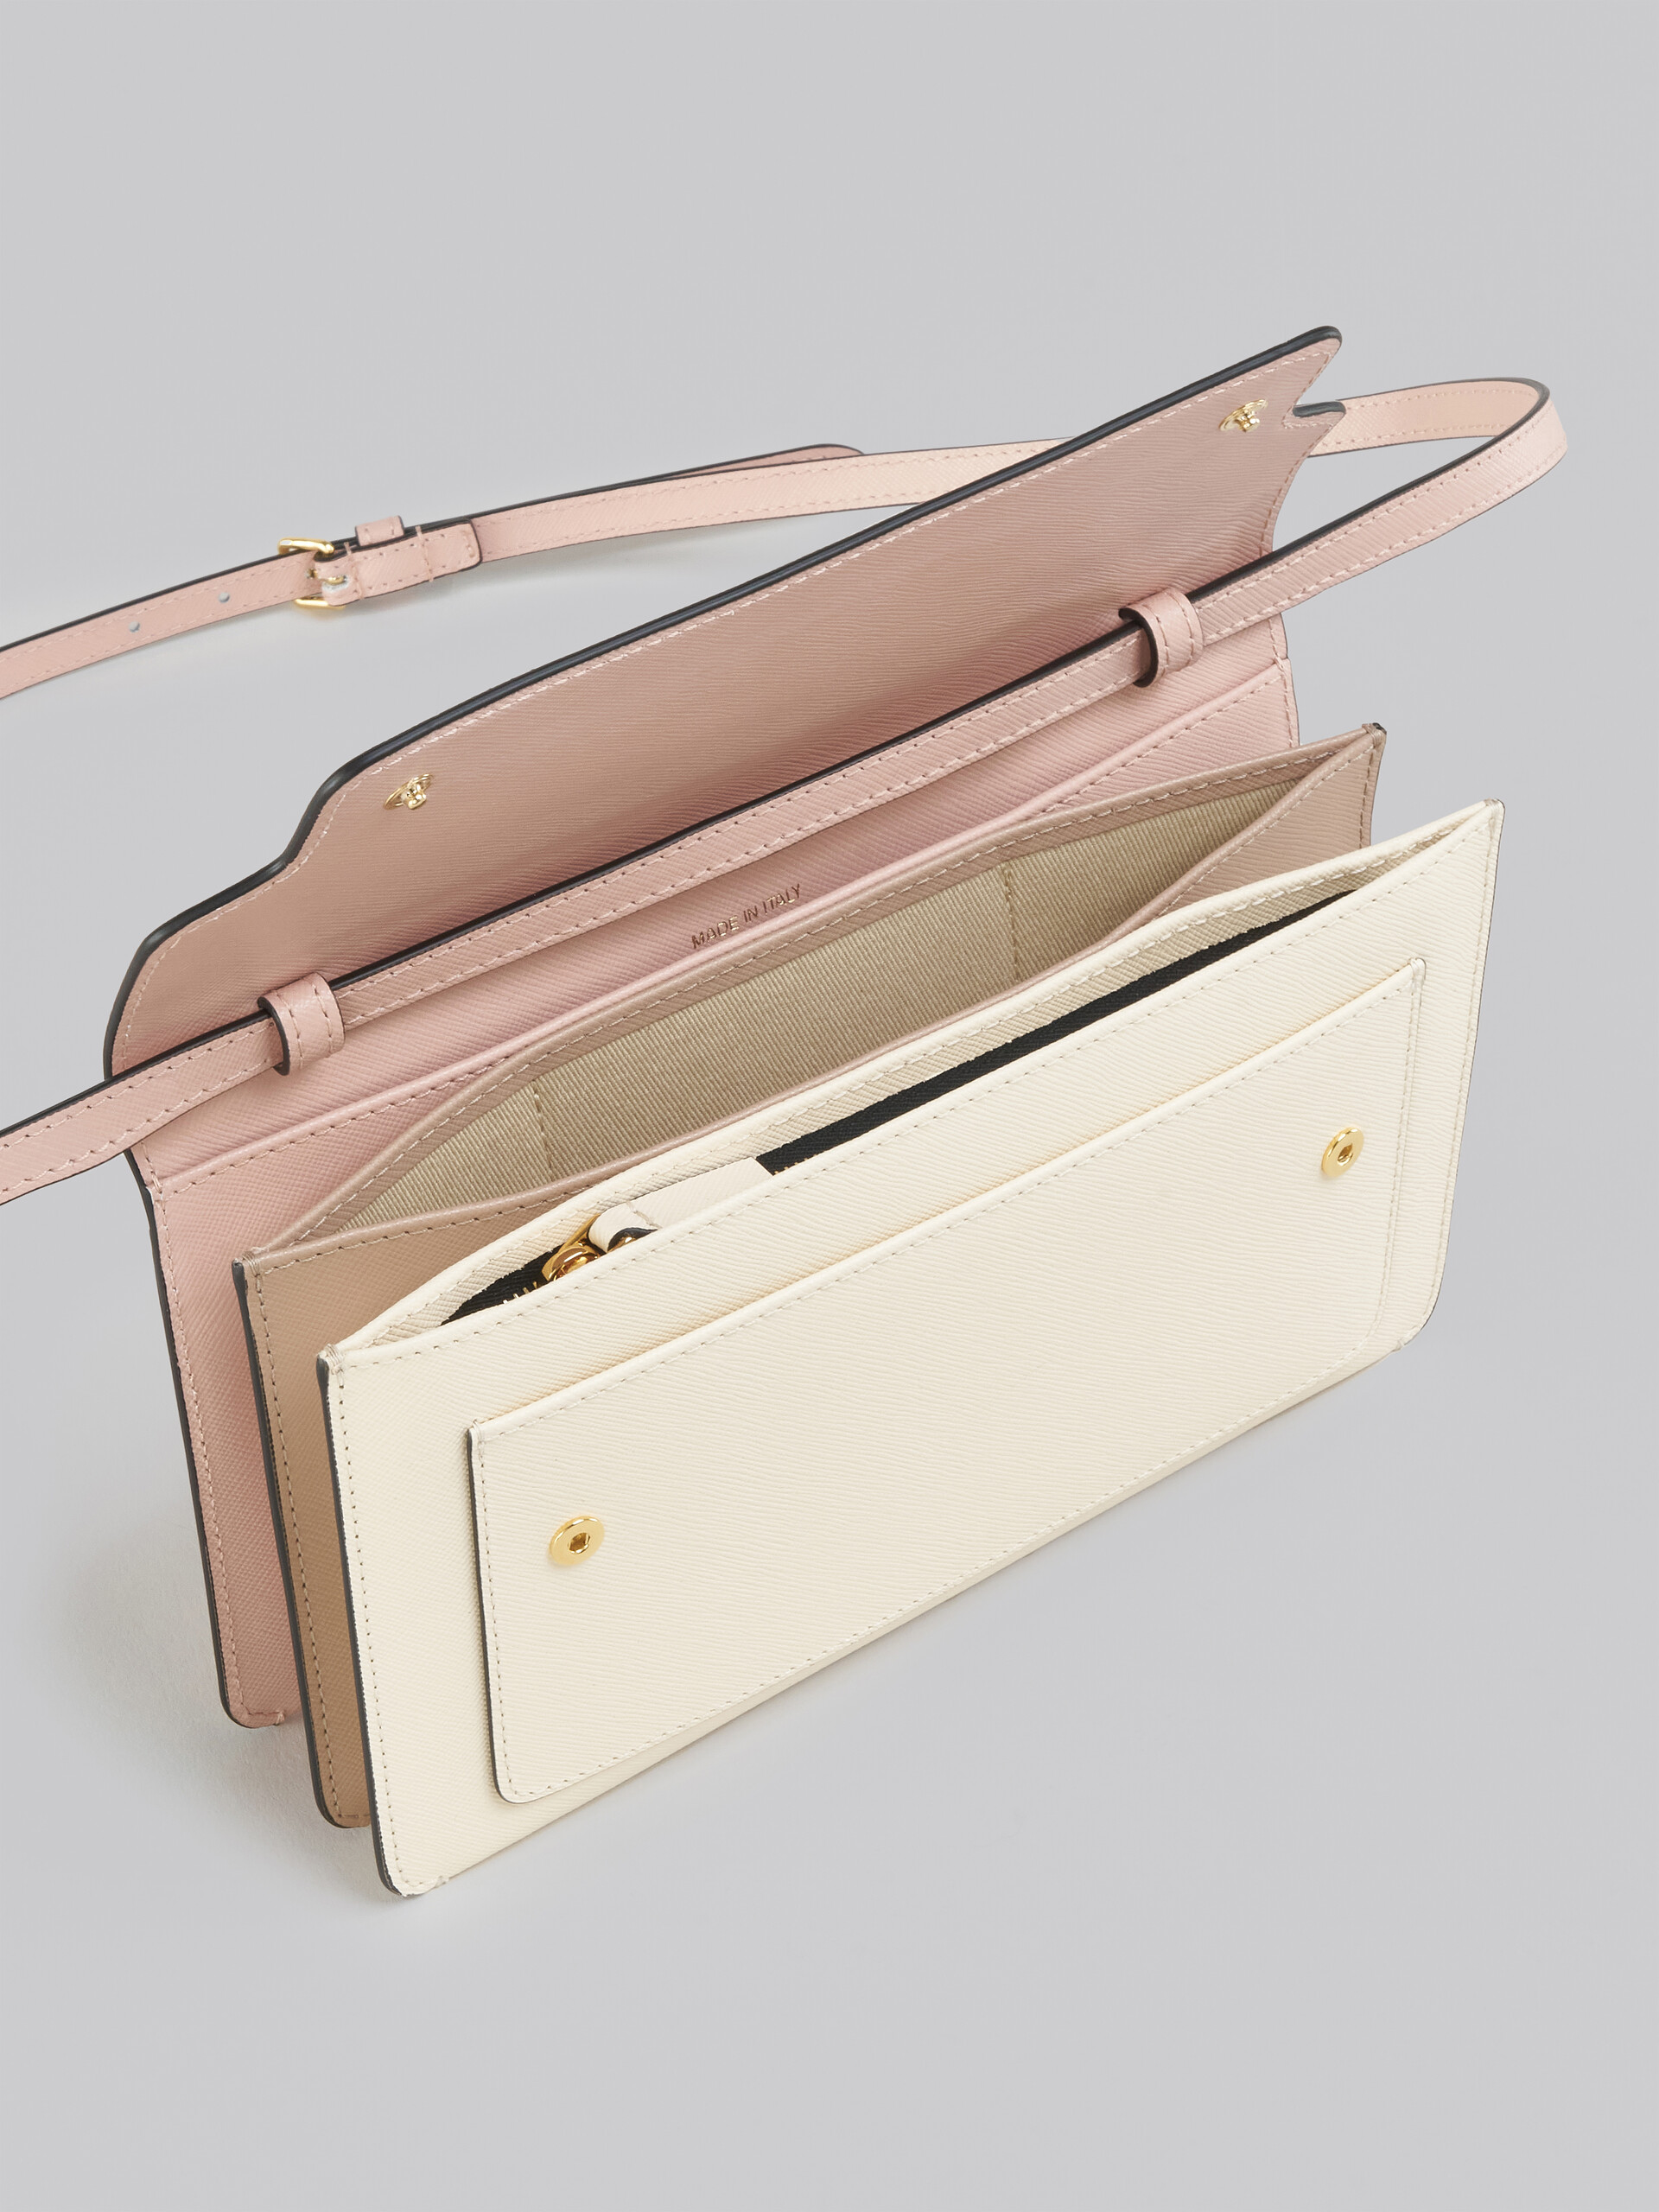 Trunk Clutch in pink white and beige saffiano leather - Pochette - Image 4